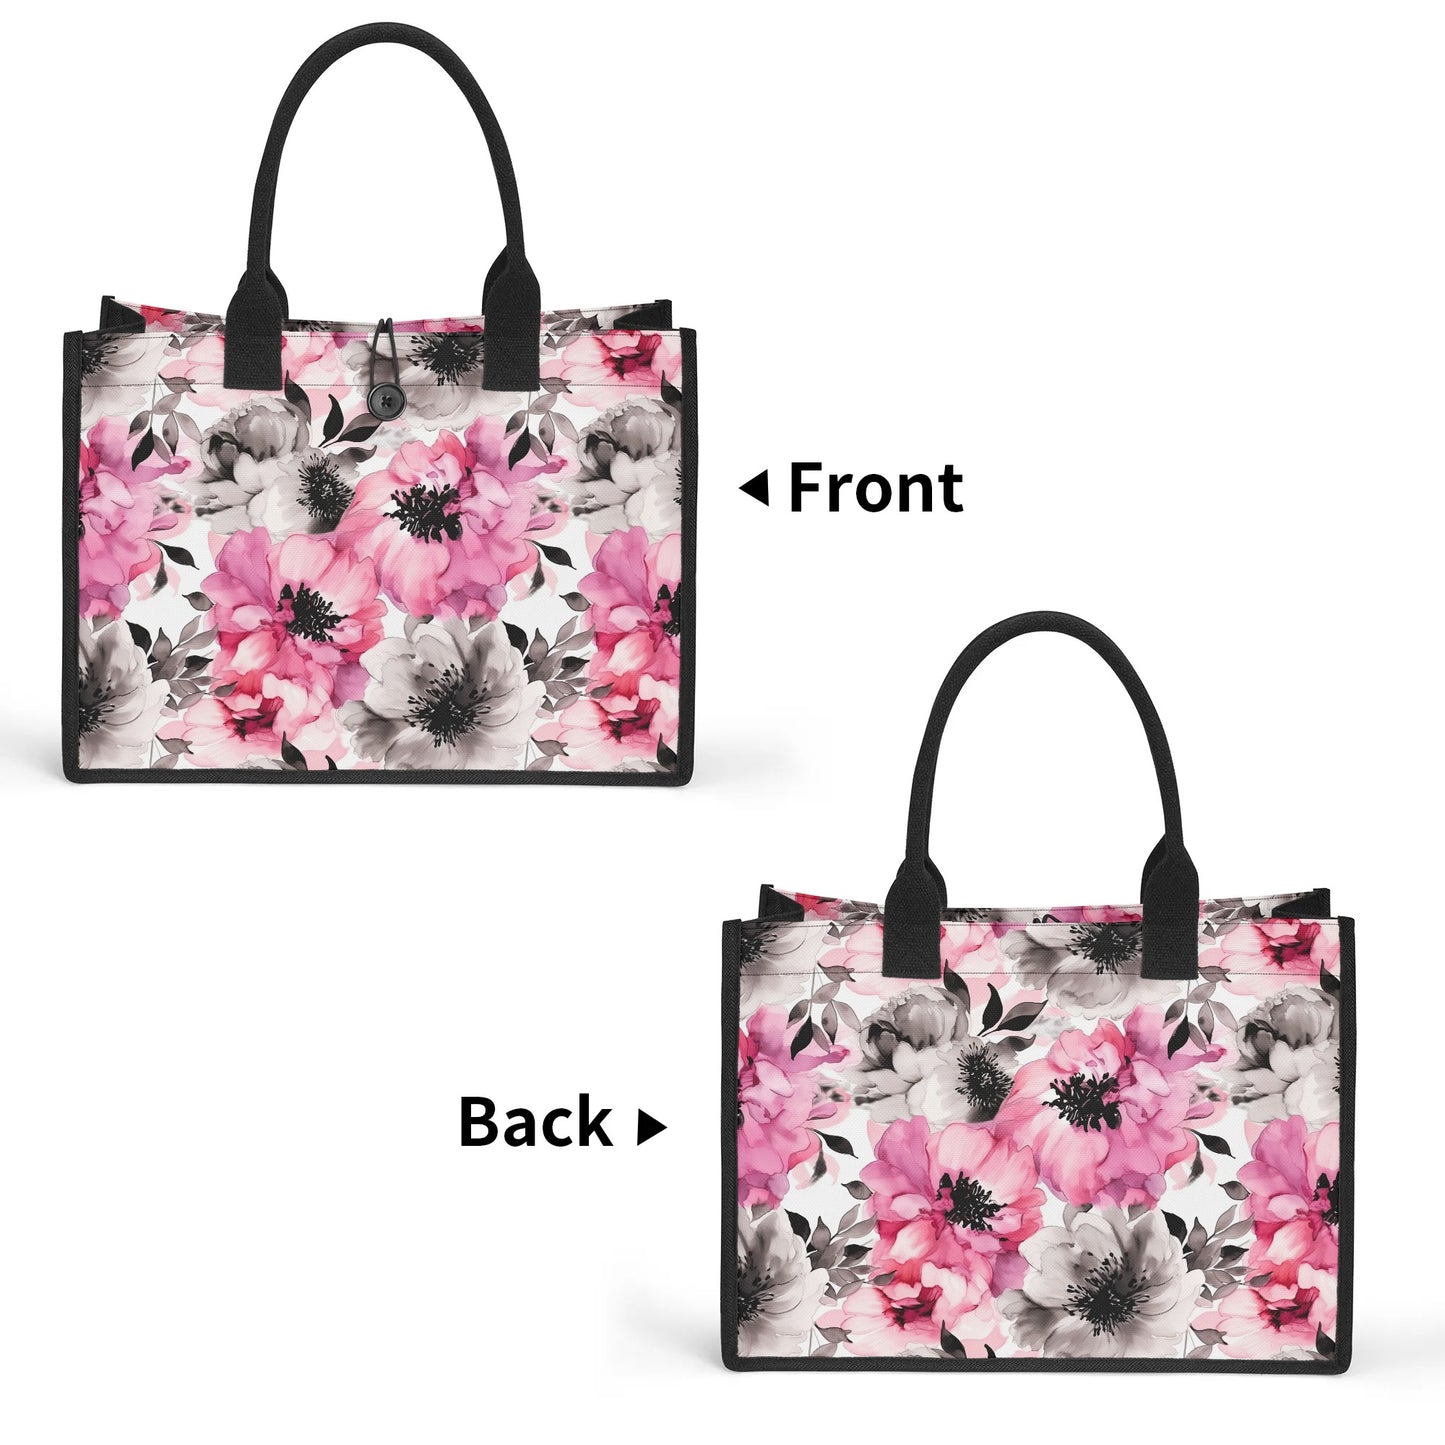 Graceful Elegance: Large Pink and Grey Watercolor Flower Structured Button Closure Canvas Tote Bag in 2 Sizes